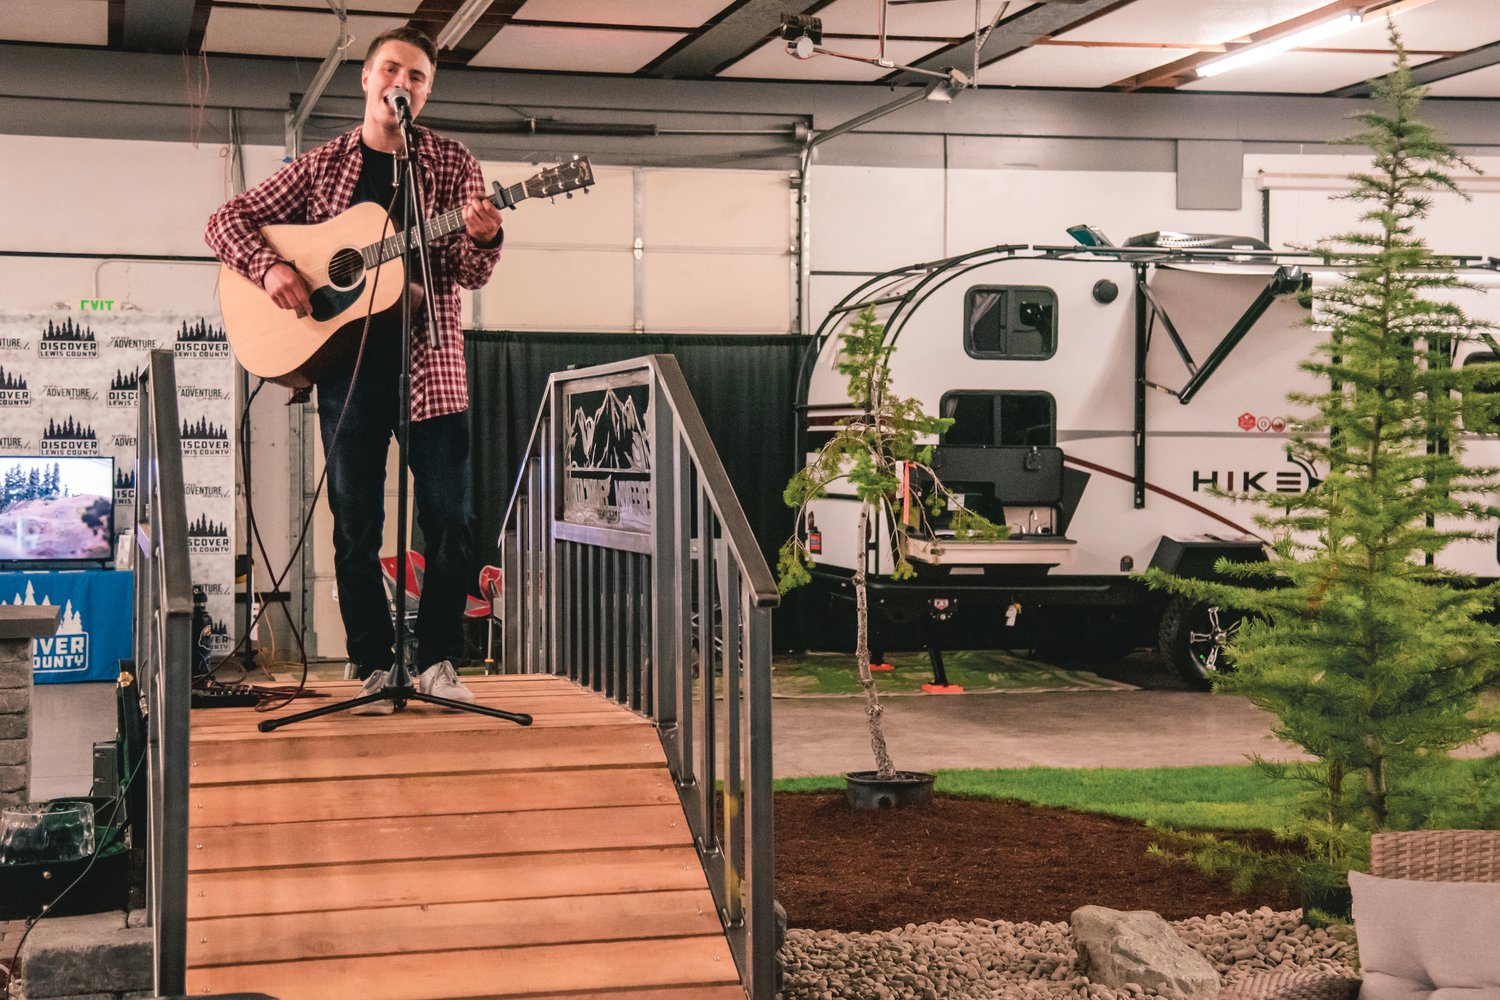 FILE PHOTO — Dylan Hathaway performs live music in the Blue Pavilion during a home and garden show in 2021 at the Southwest Washington Fairgrounds.